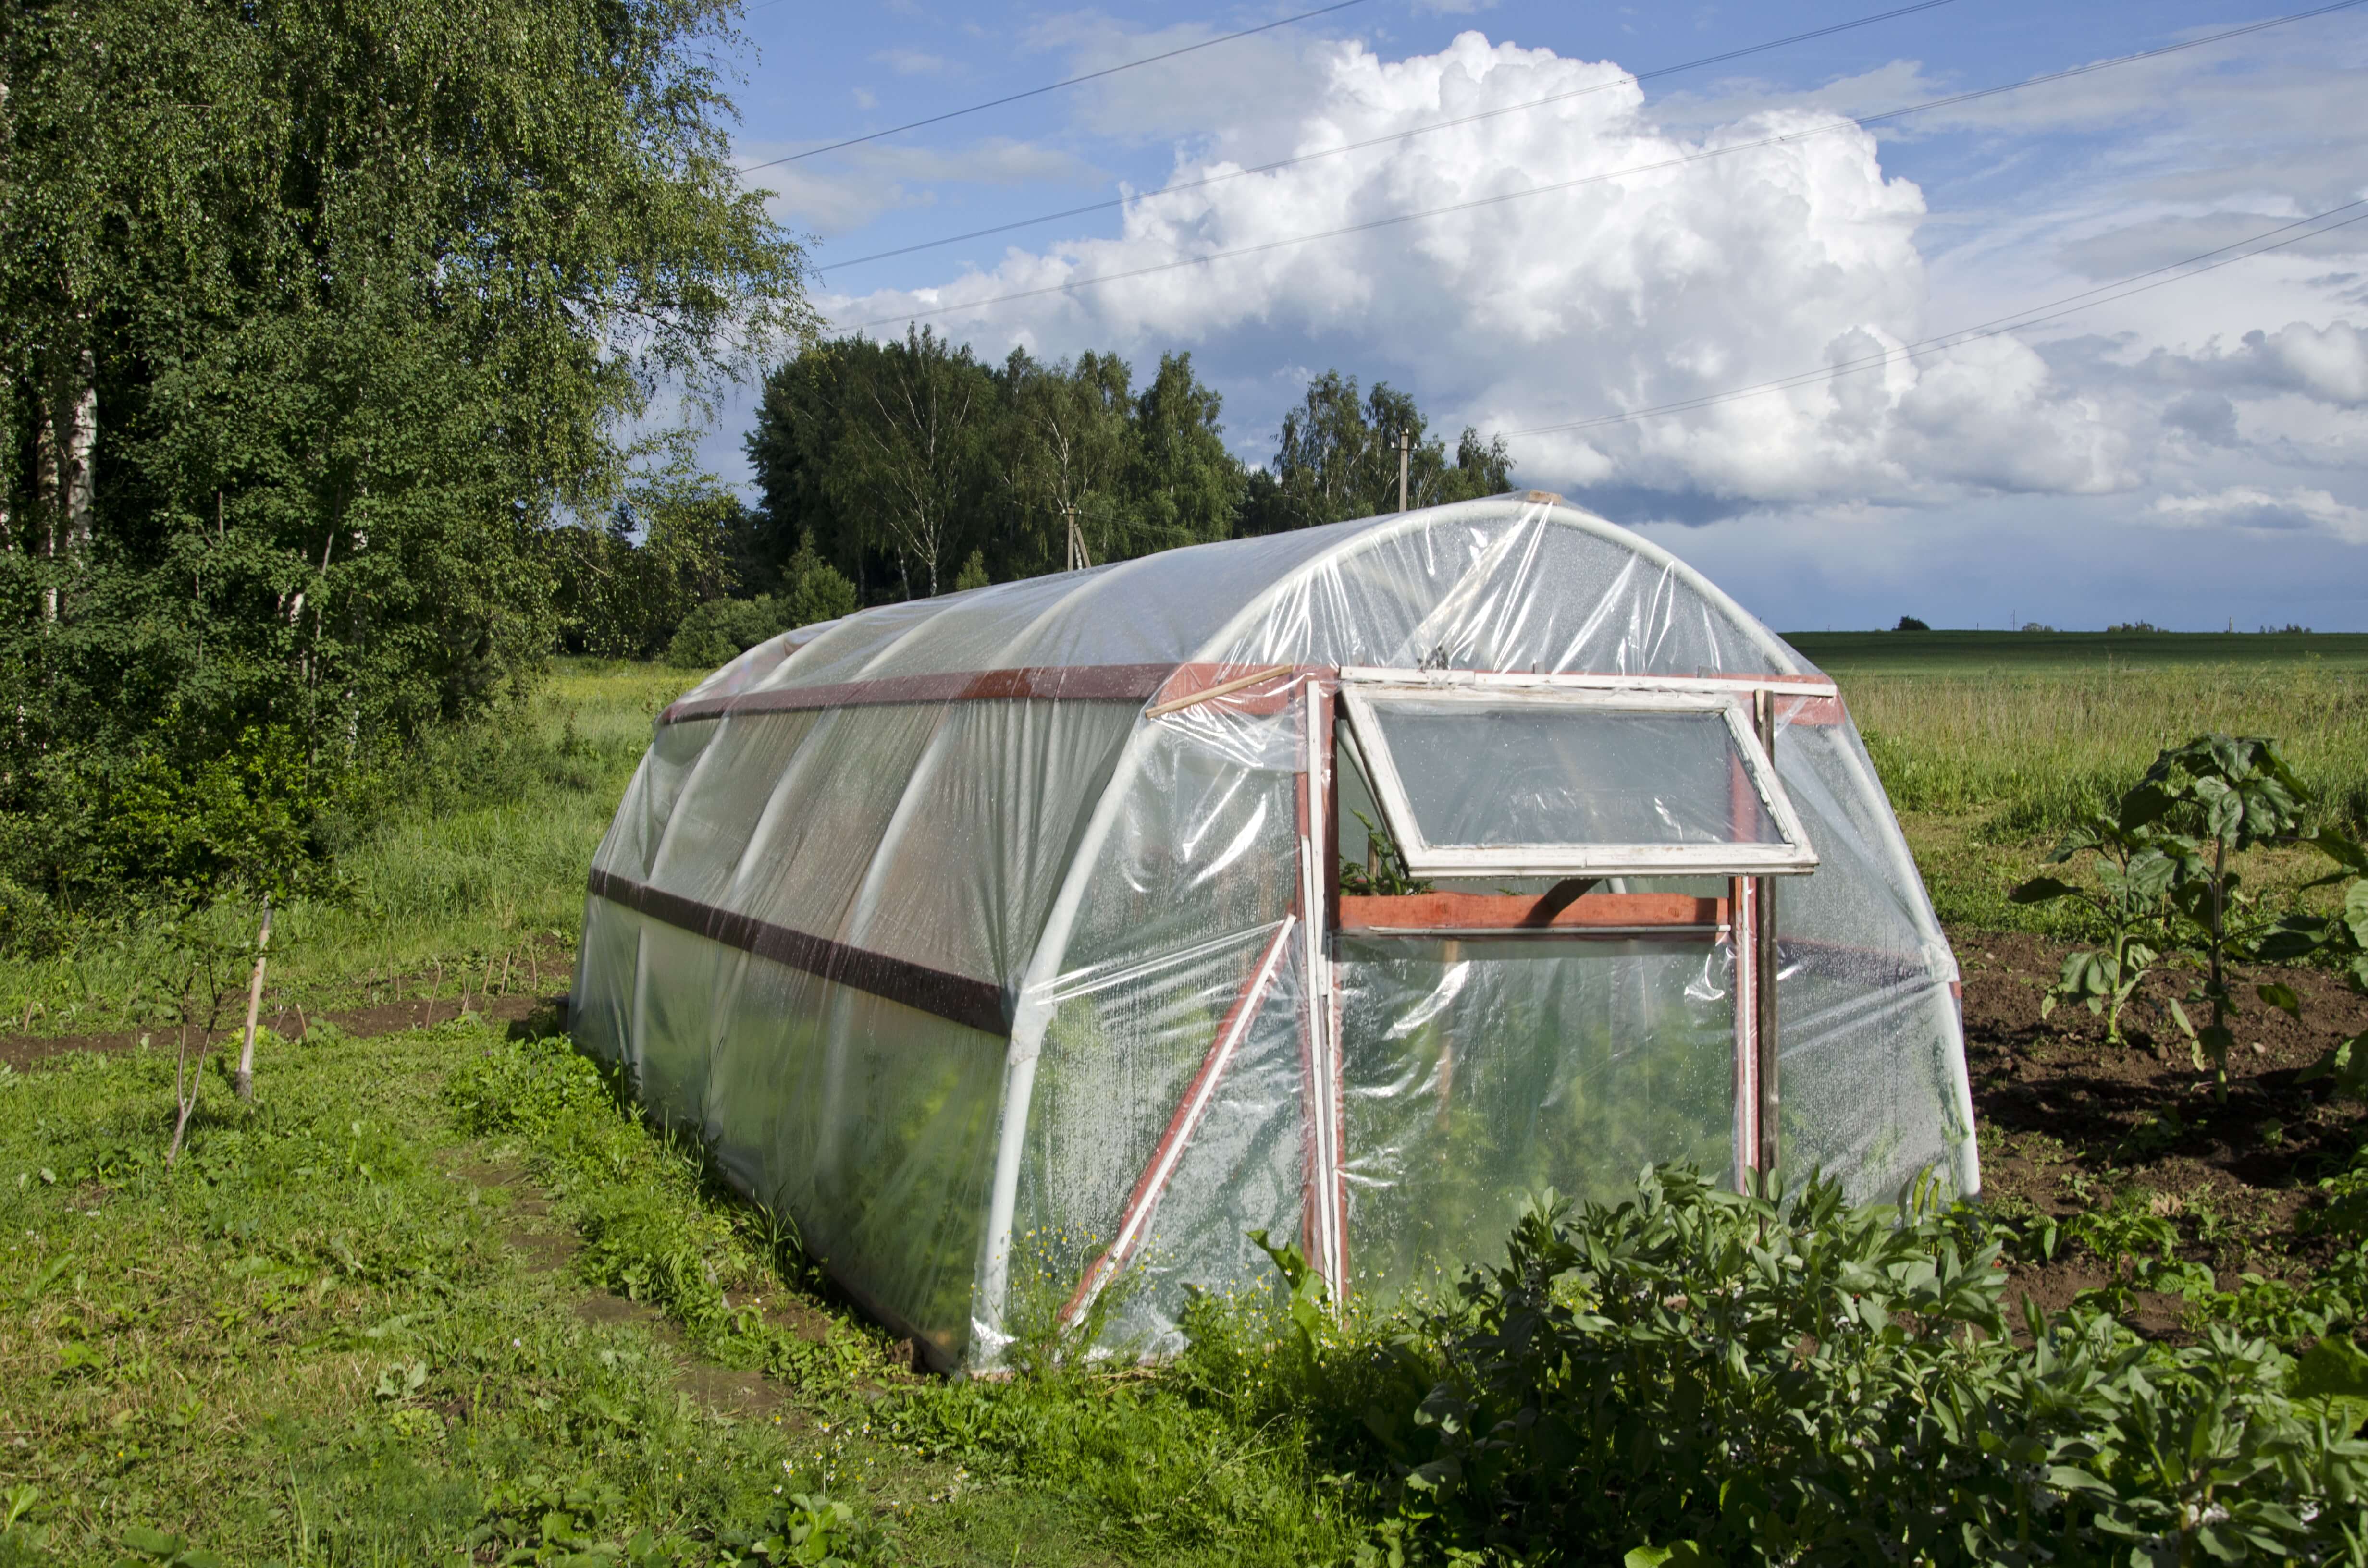 shutterstock_203578642_plastic-agriculture-greenhouse-hothouse-in-summer-farm-garden_Alis-Photo